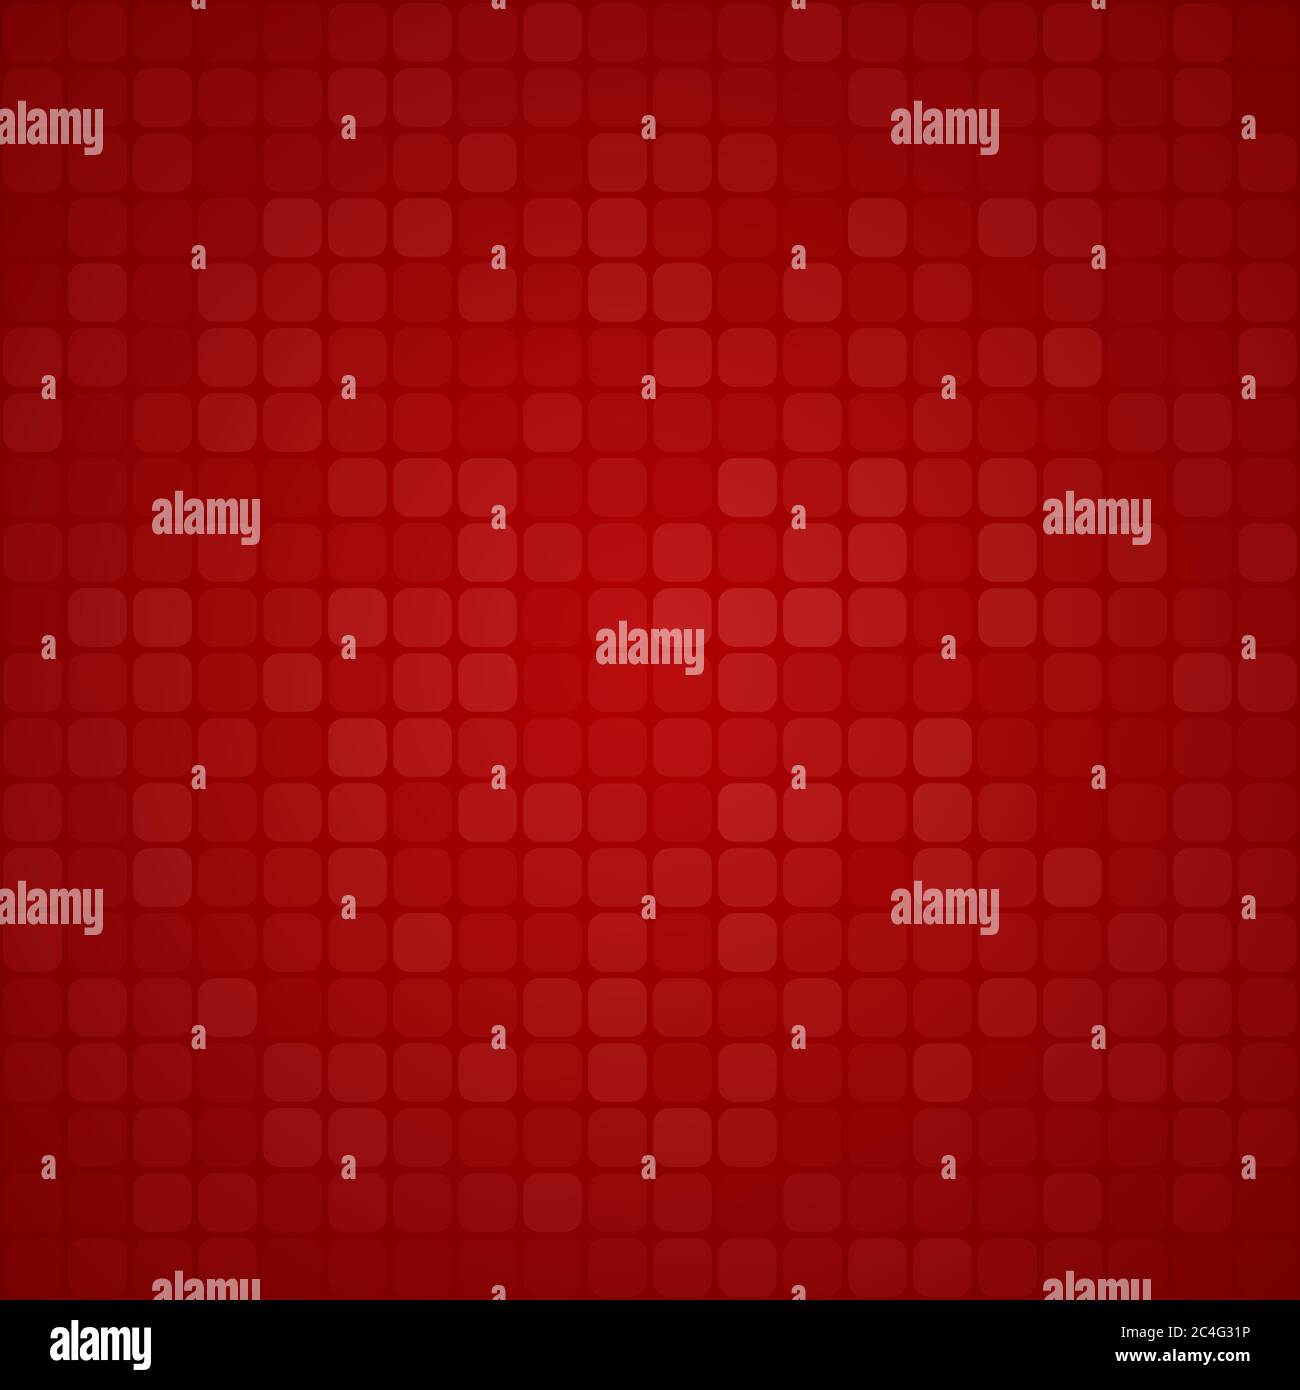 Abstract background of small squares or pixels in red colors Stock Vector